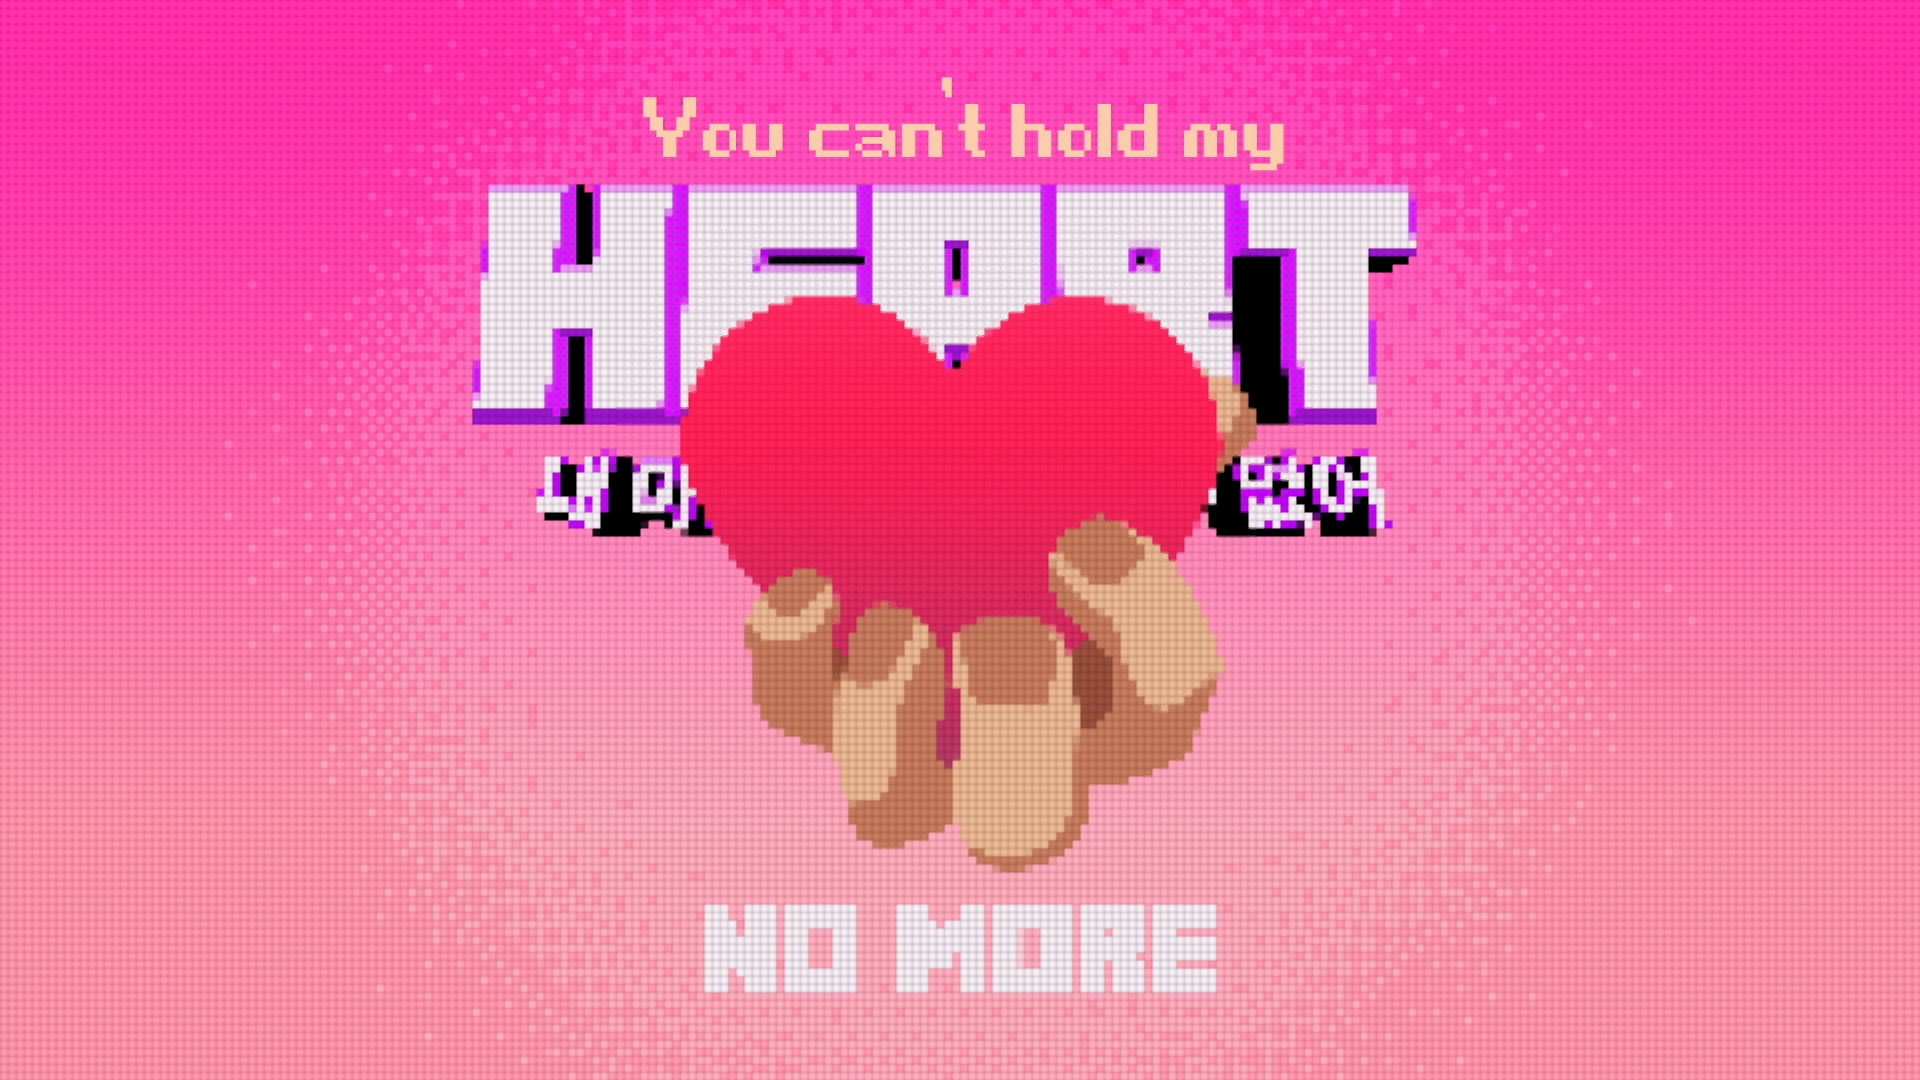 YOU CAN'T HOLD MY HEART